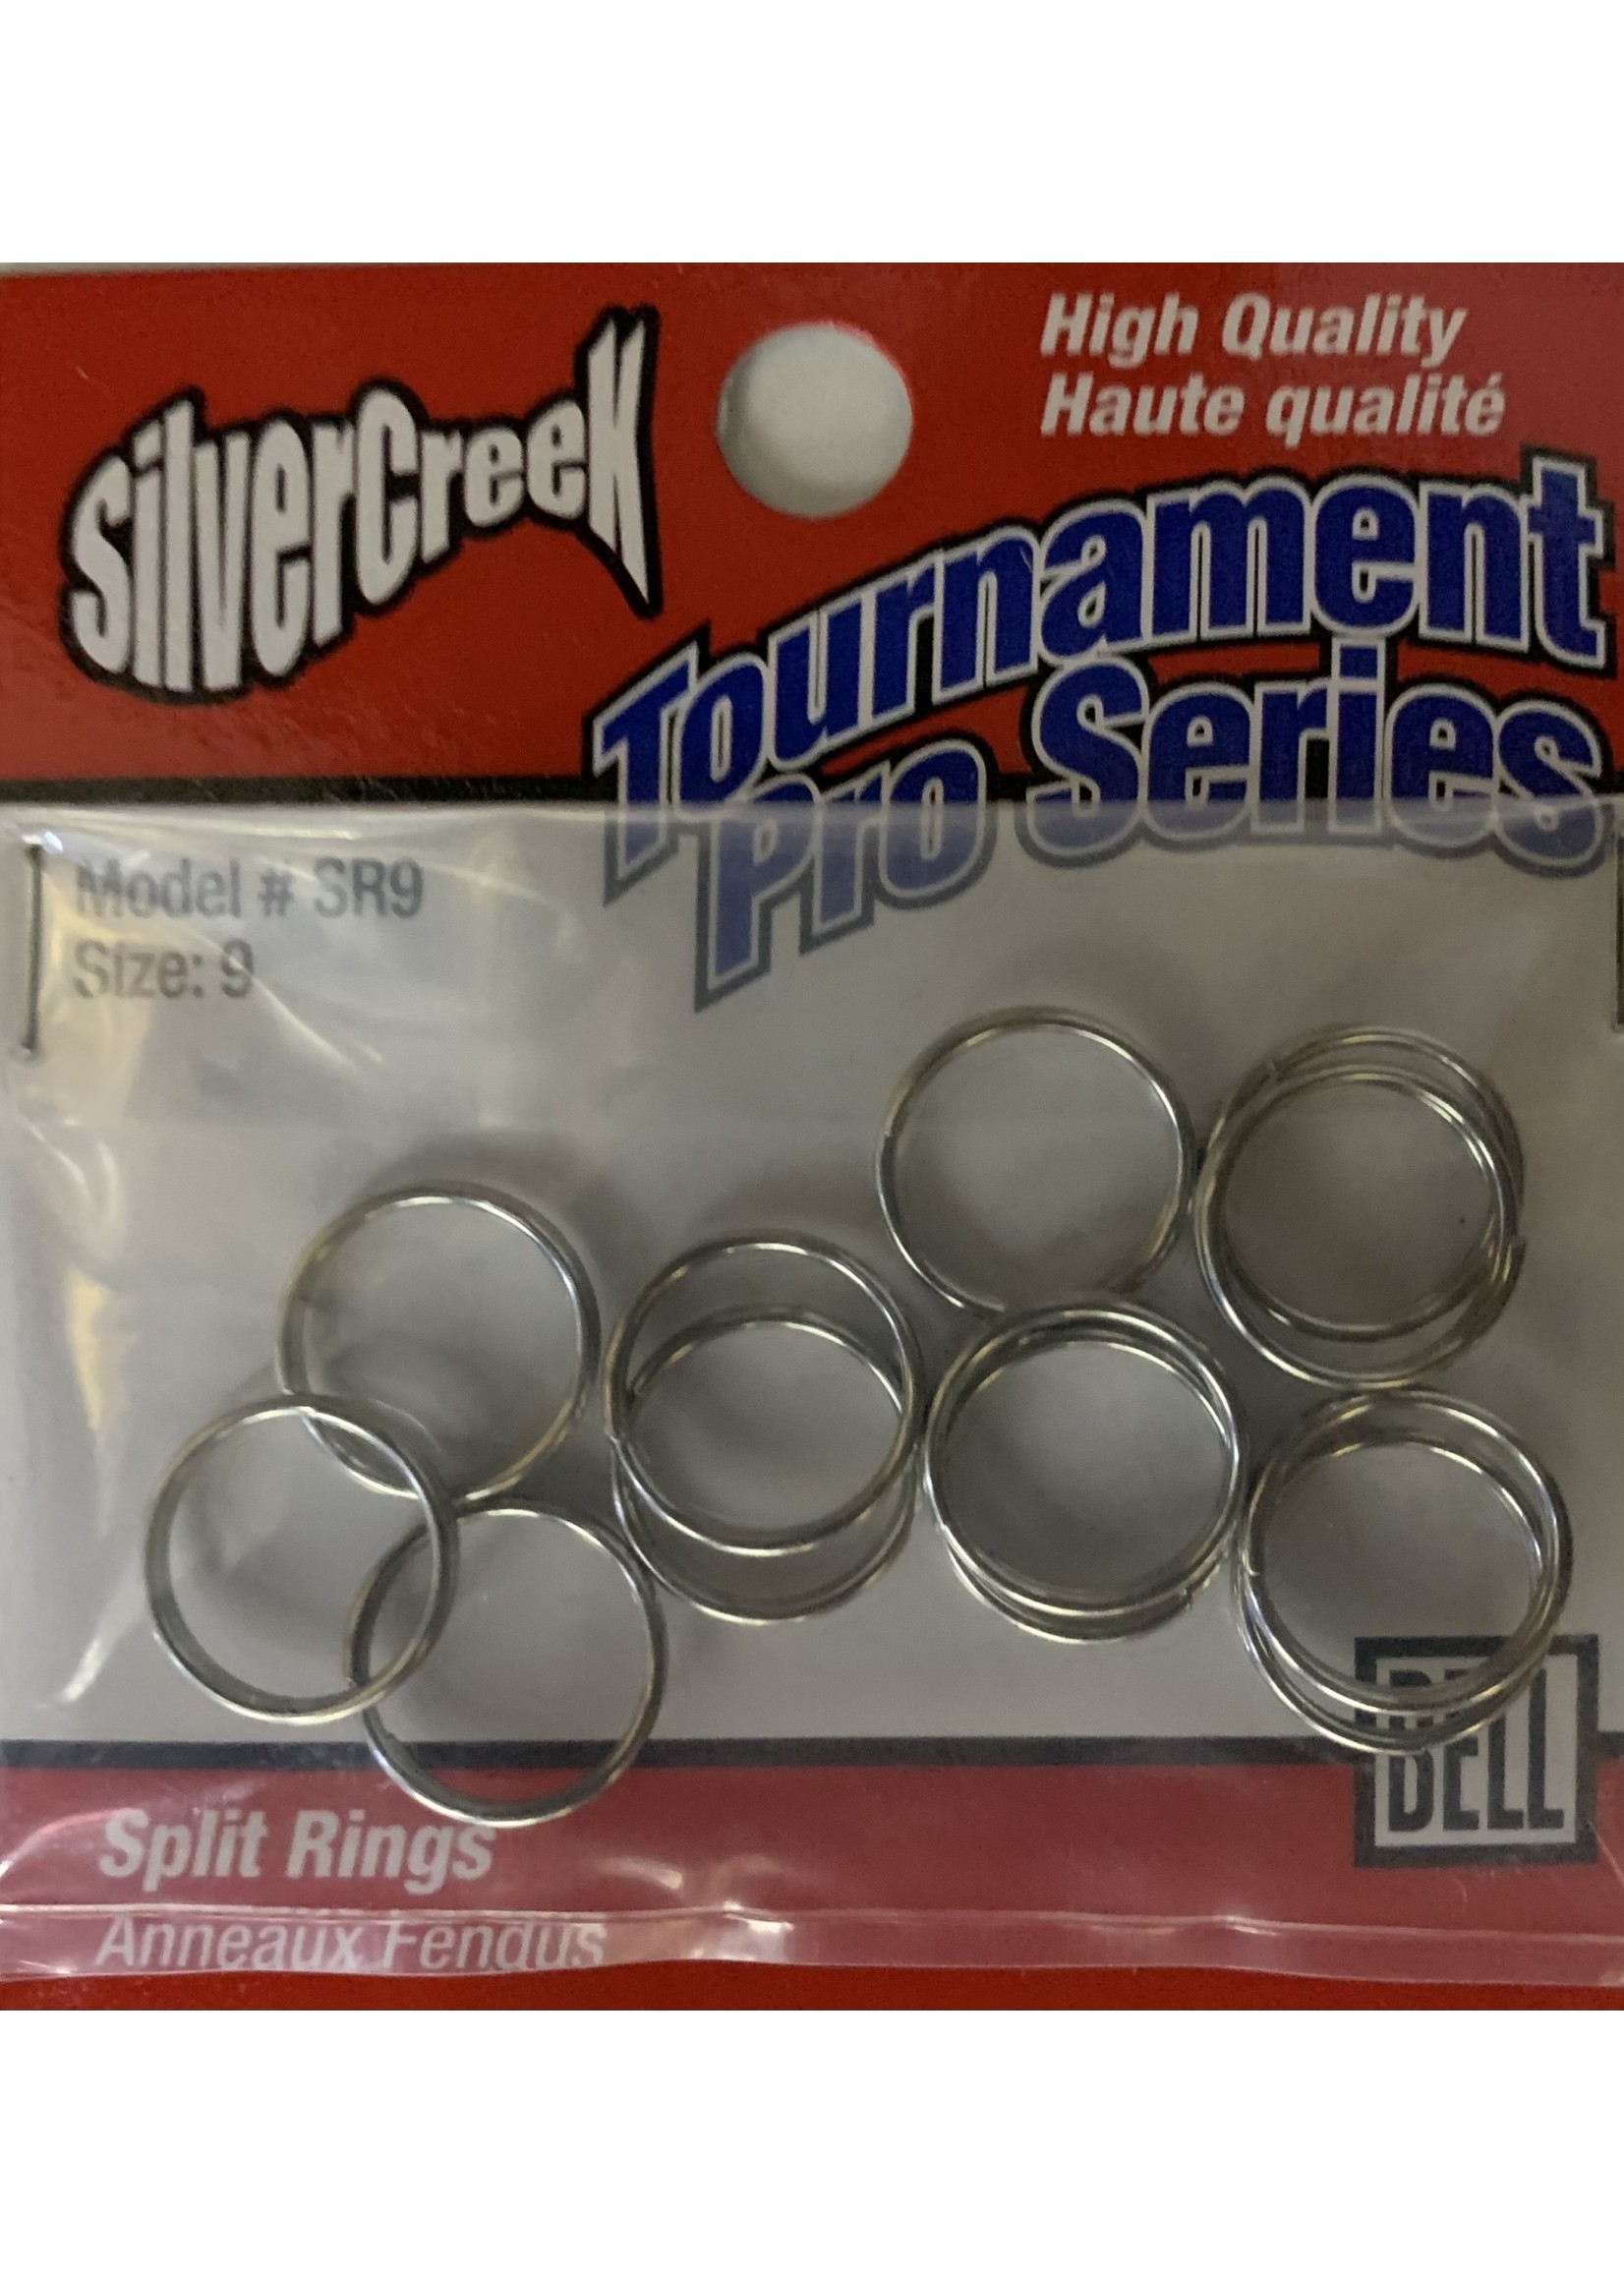 BELL OUTDOOR PRODUCTS SILVER CREEK SPLIT RINGS 12PER PK